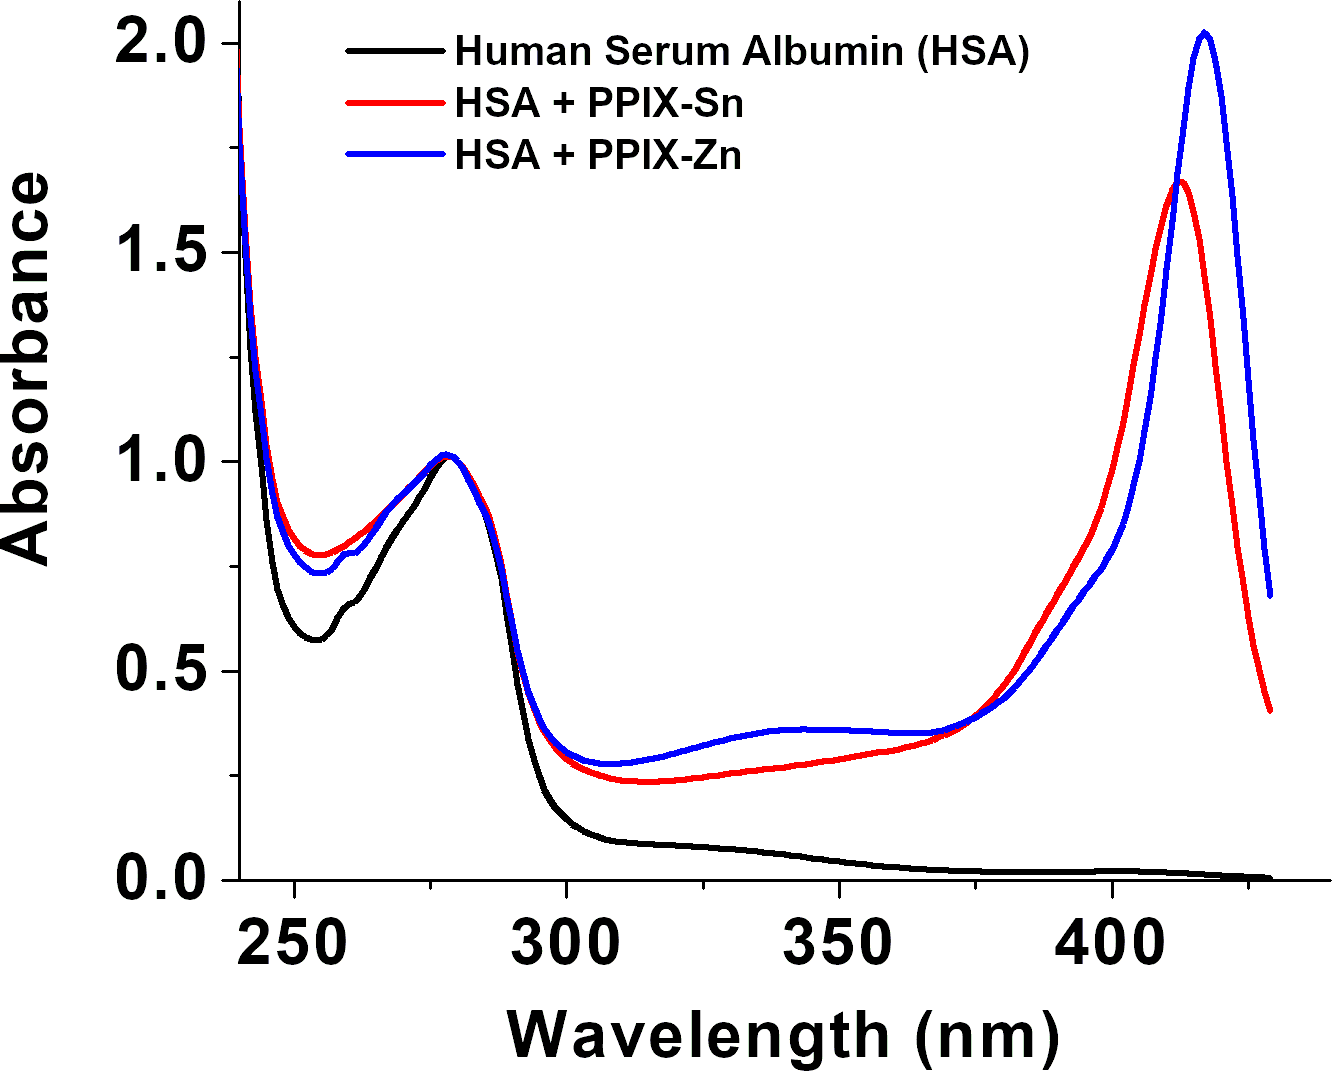 Figure 1. Absorbance spectra of Human Serum (HSA), HSA+PPIX-Sn and HSA+PPIX-Zn